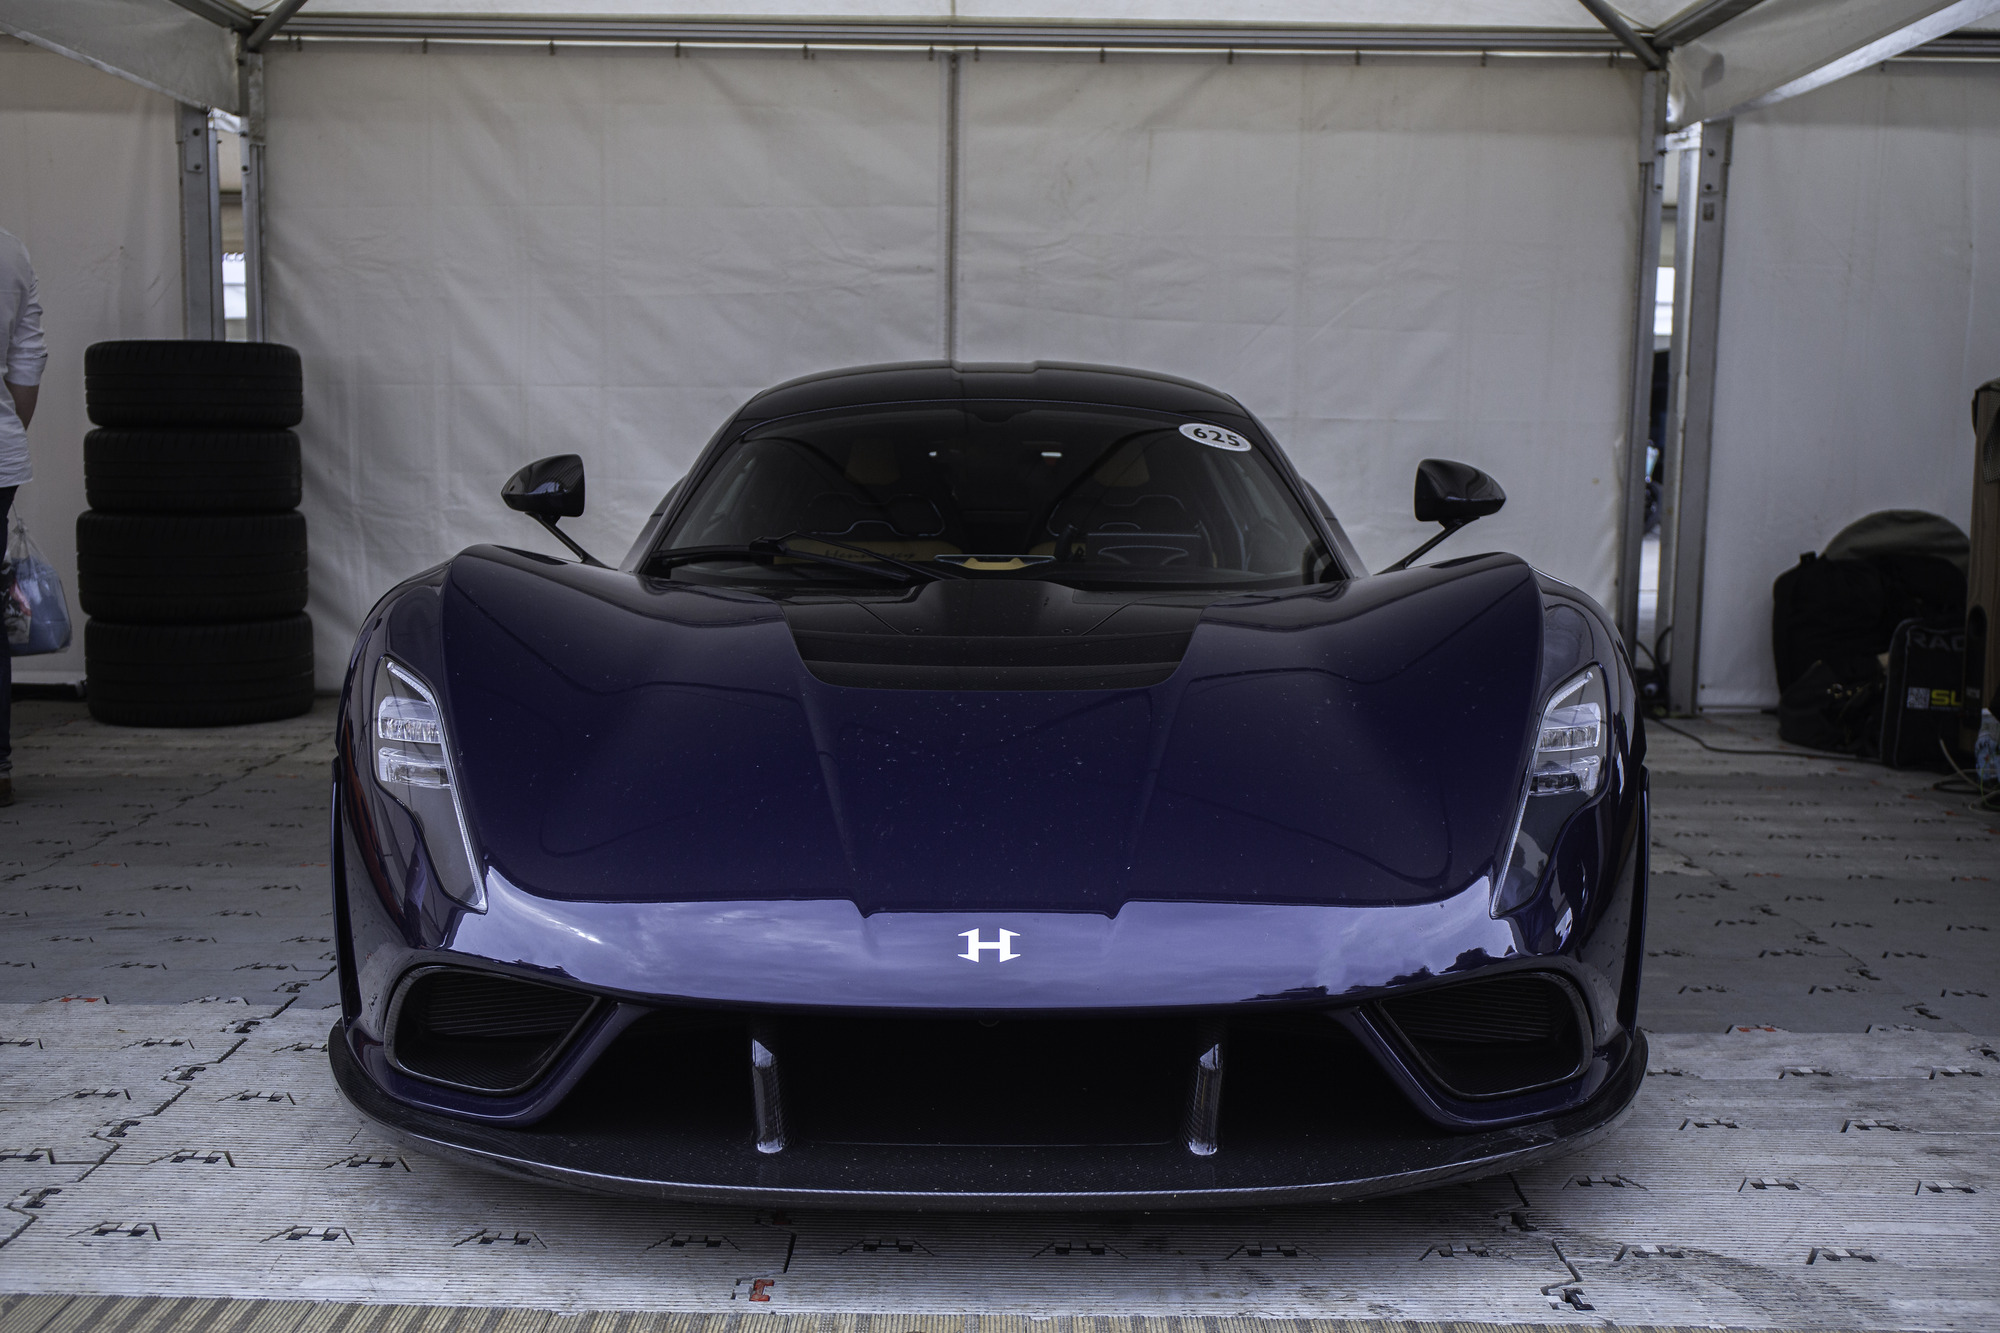 Front view of the Hennessy Venom F5